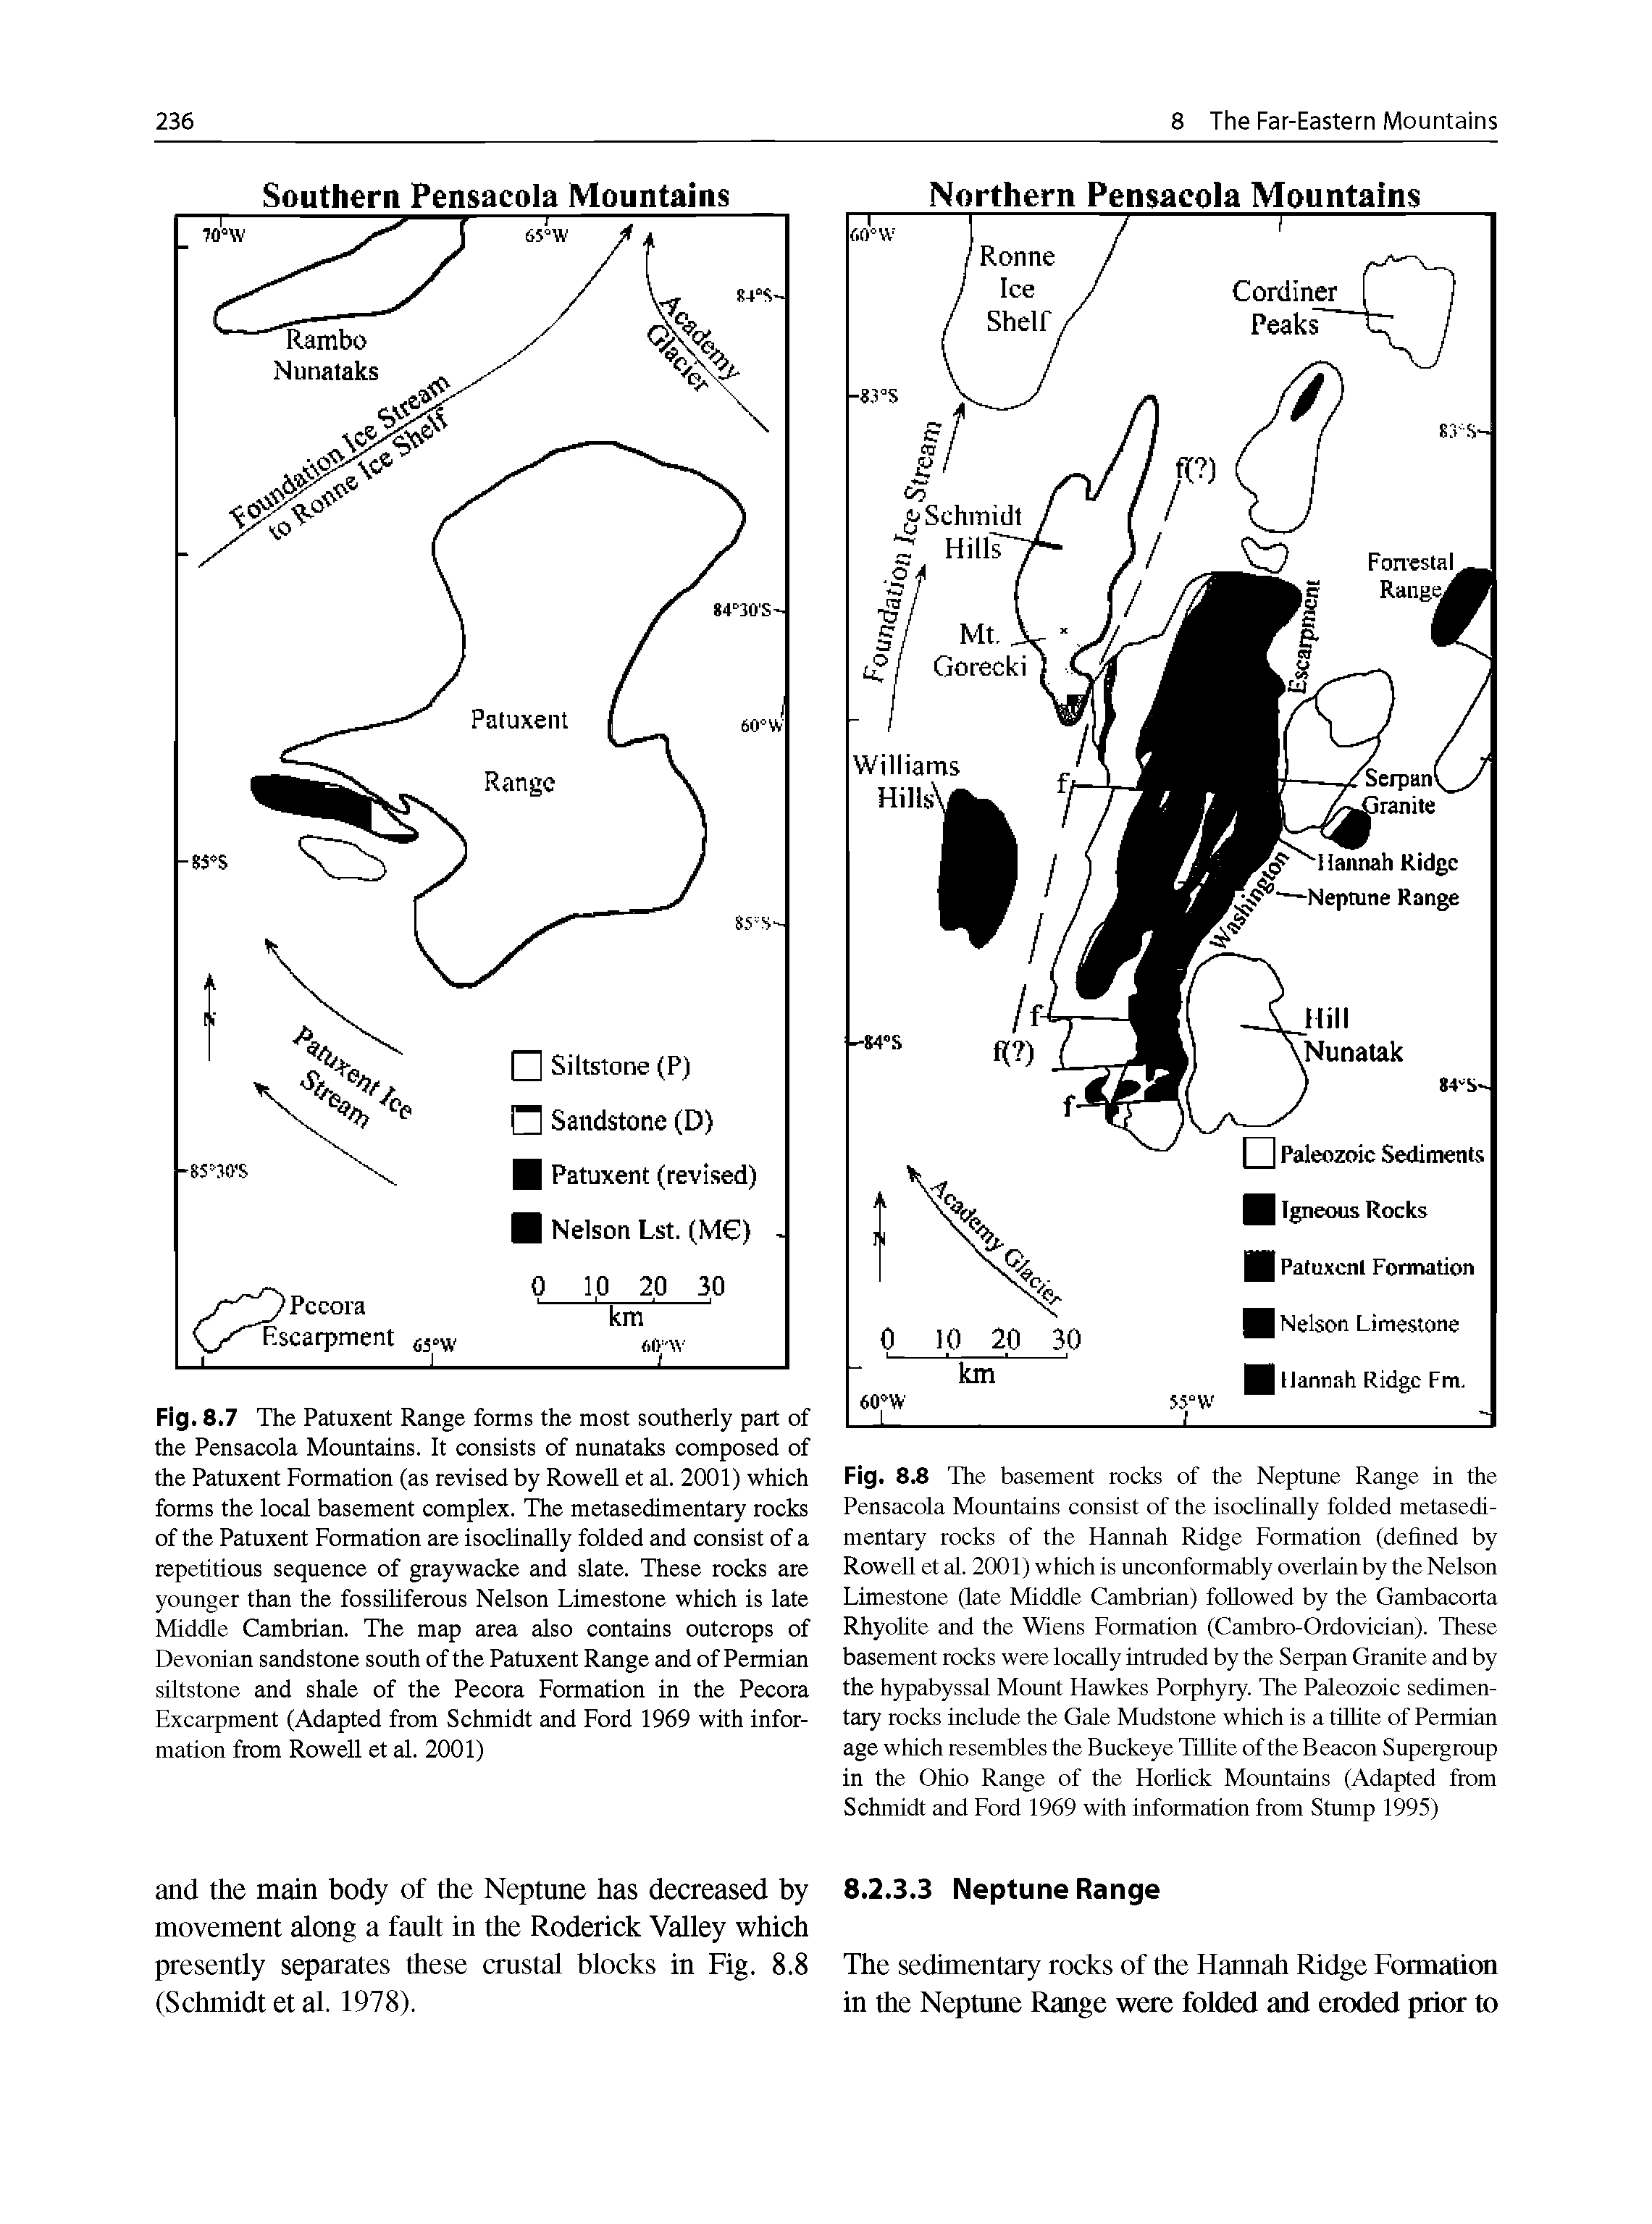 Fig. 8.7 The Patuxent Range forms the most southerly part of the Pensacola Mountains. It consists of nunataks composed of the Patuxent Formation (as revised by RoweU et al. 2001) which forms the local basement complex. The metasedimentary rocks of the Patuxent Formation are isoclinally folded and consist of a repetitious sequence of graywacke and slate. These rocks are younger than the fossiliferous Nelson Limestone which is late Middle Cambrian. The map area also contains outcrops of Devonian sandstone south of the Patuxent Range and of Permian siltstone and shale of the Pecora Formation in the Pecora Excarpment (Adapted from Schmidt and Ford 1969 with information from Rowell et al. 2001)...